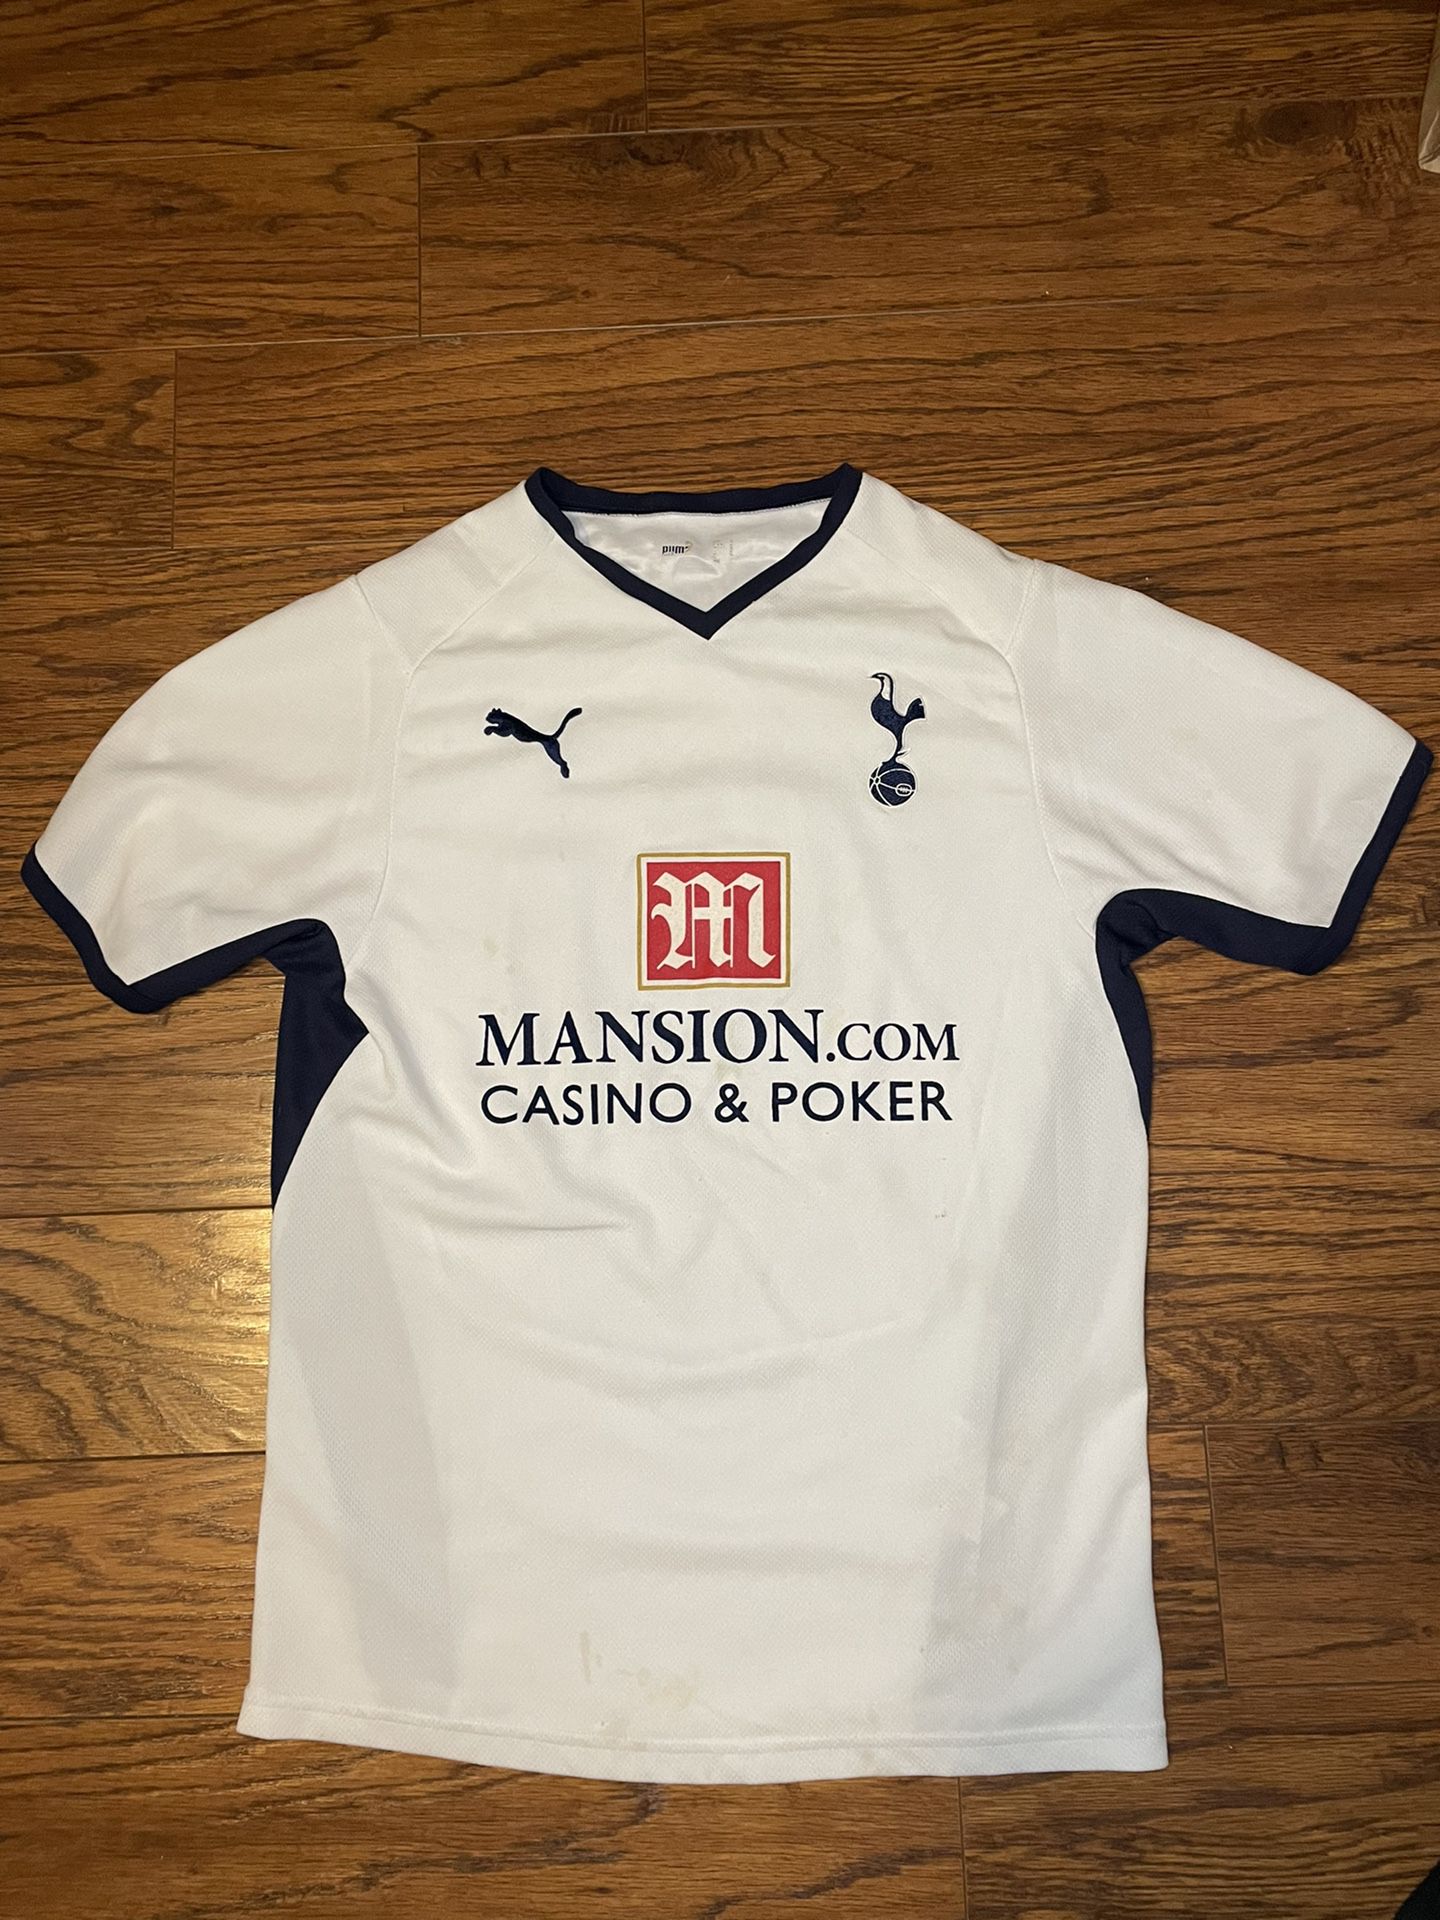 Tottenham Hotspur Jerseys  New, Preowned, and Vintage